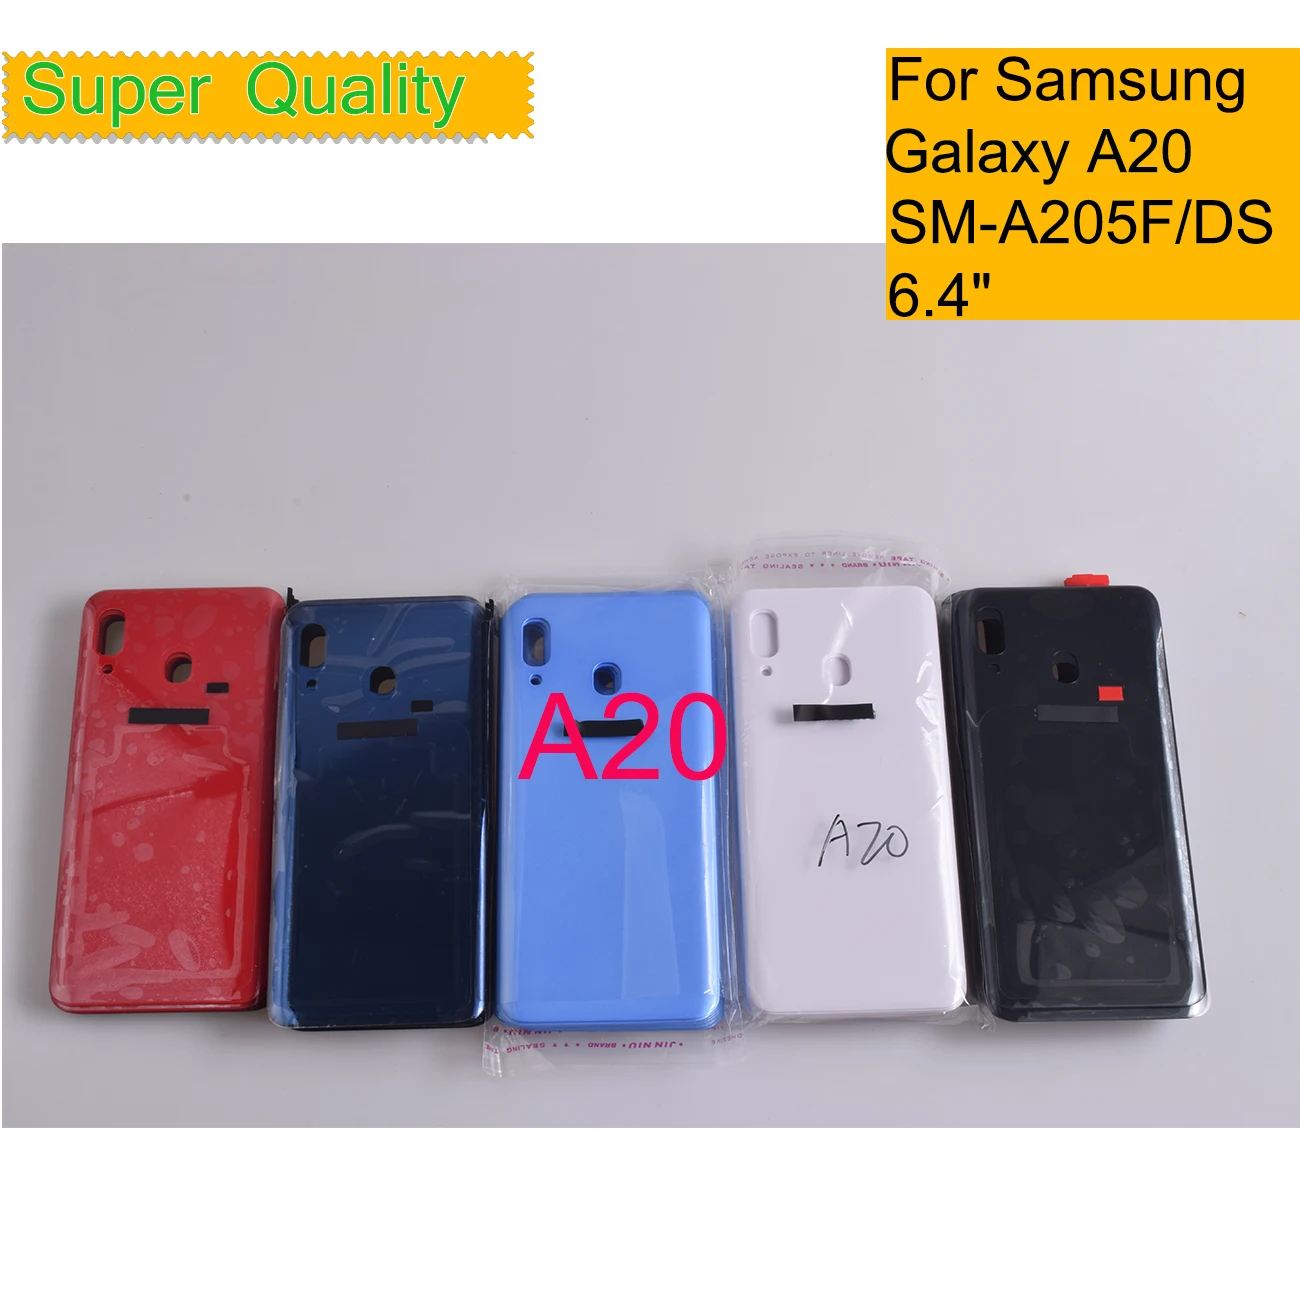 

10Pcs/Lot For Samsung Galaxy A20 A205 A205F Housing Back Cover Case Rear Battery Door Chassis Housing Replacement